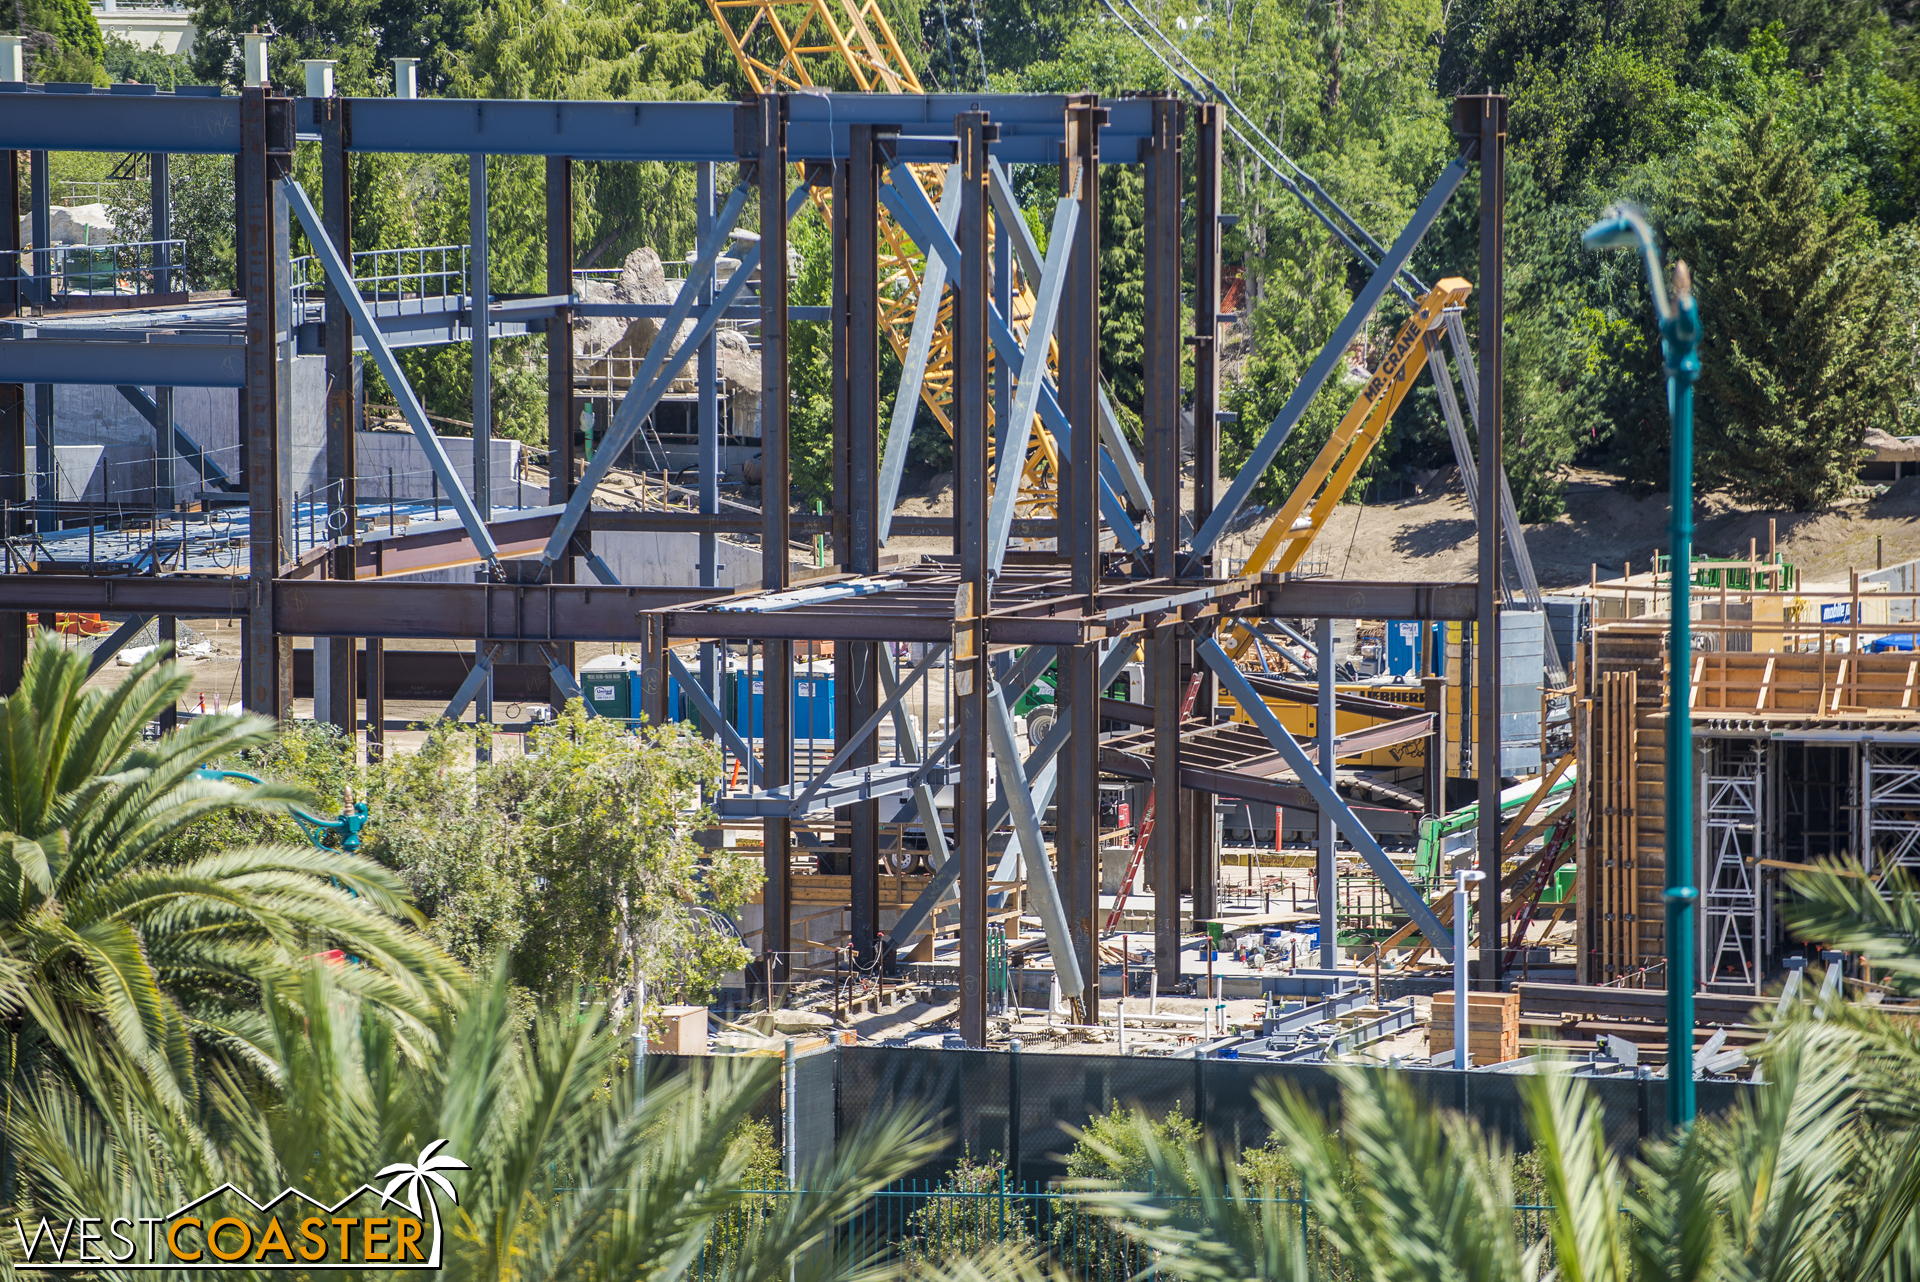  They're clearly aiming for this to be the new premiere and super advanced Disney attraction.&nbsp; Also, this section has an inordinate number of braced frames in multiple directions--an indication of a narrow part of the building that needs more la